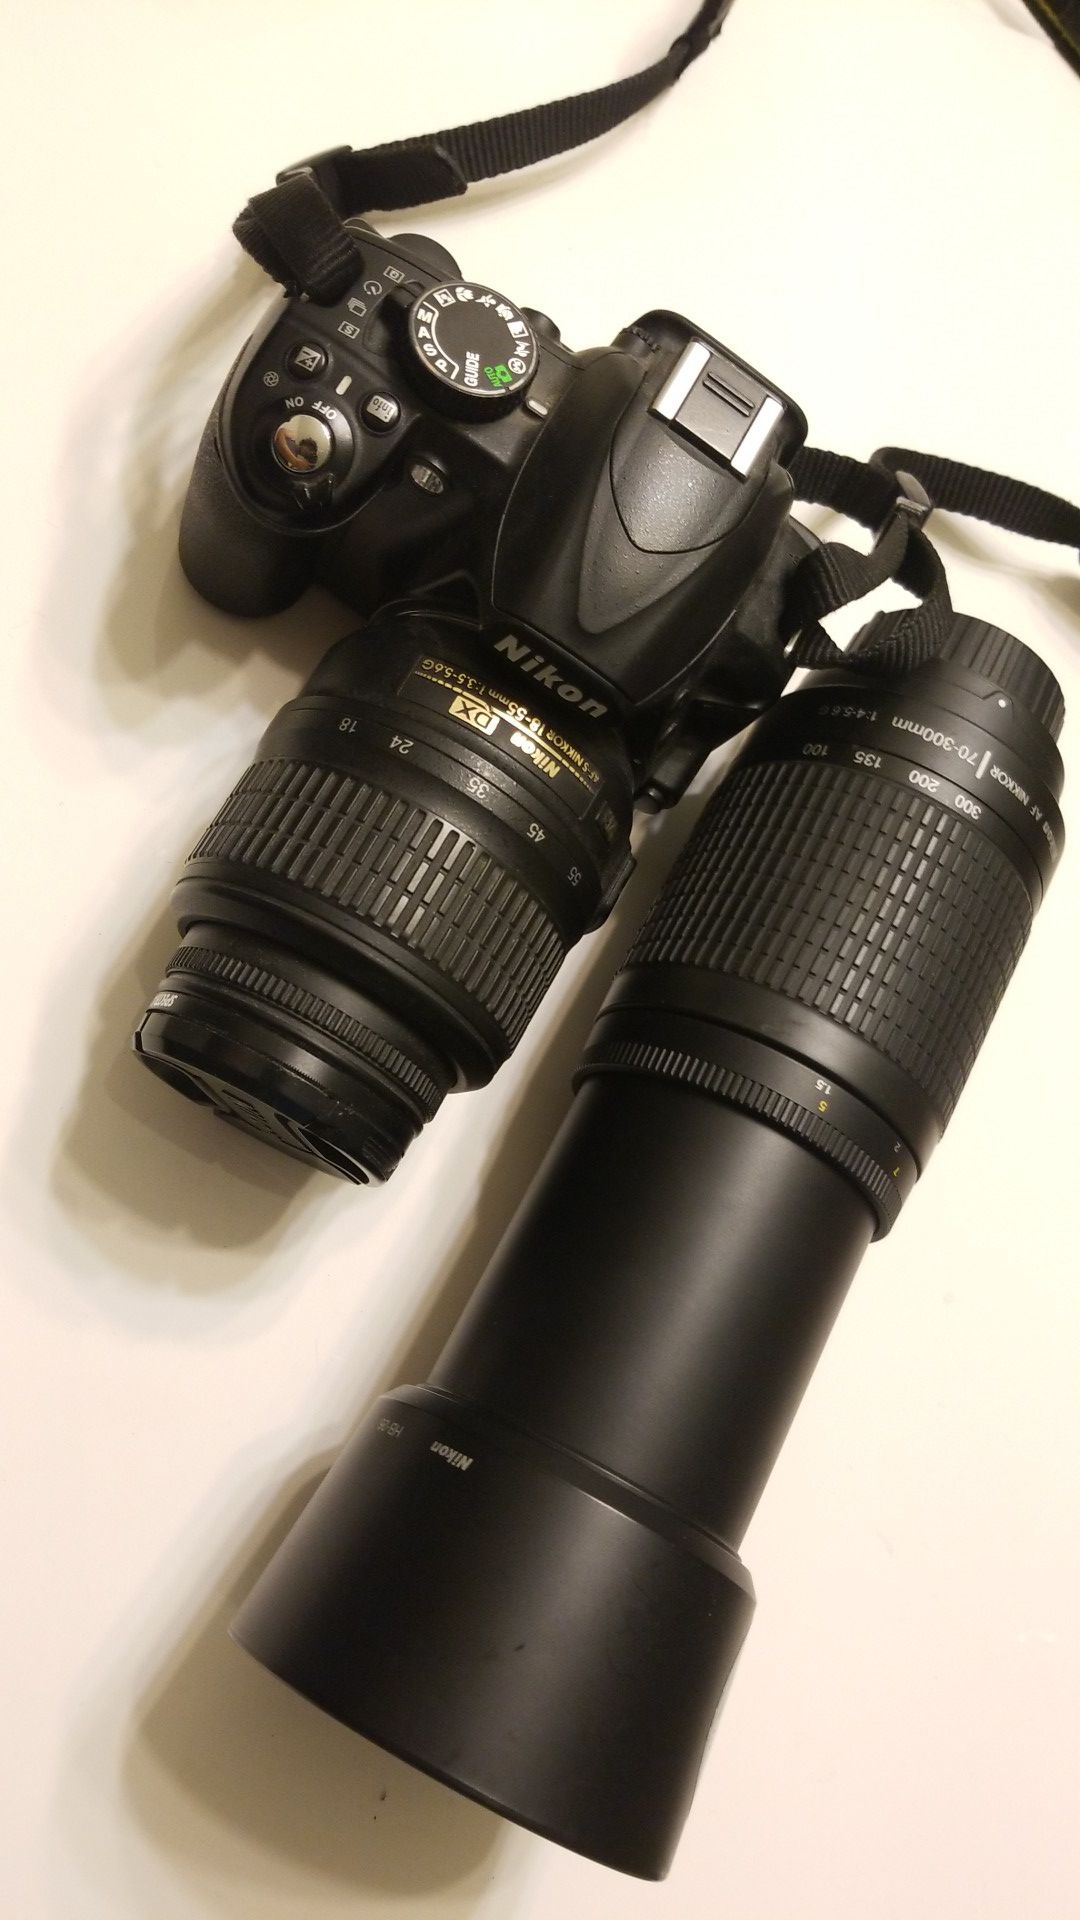 Nikon D3100 with 70-300 and 18-55 lenses